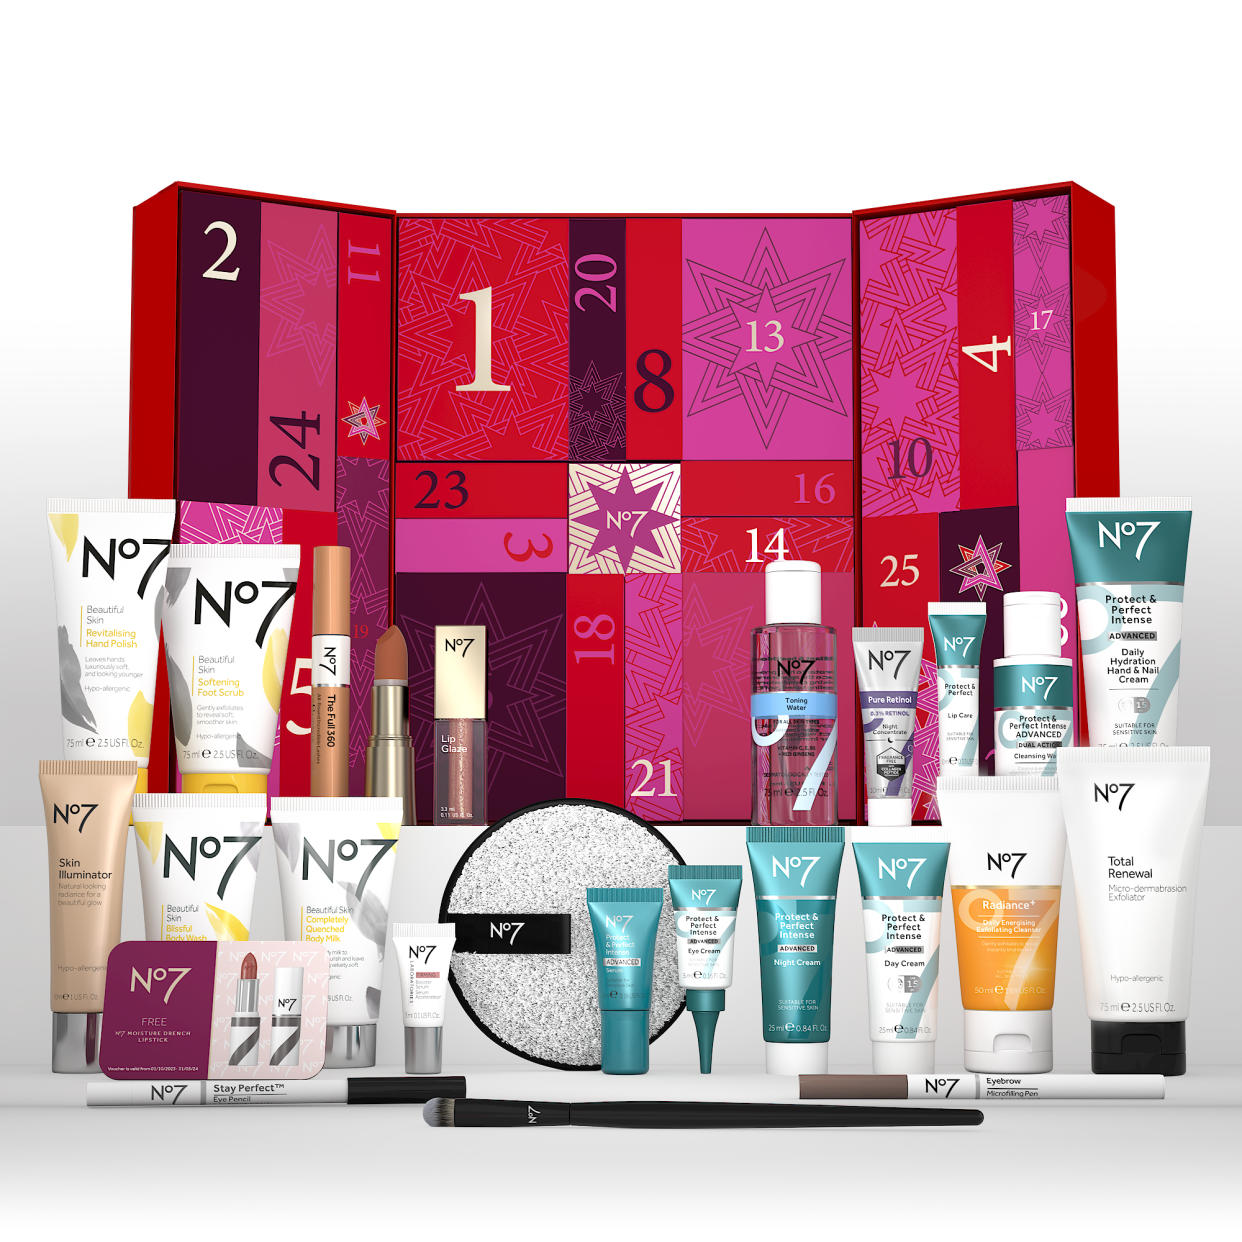 Expect to find 25 products, 14 of which are full-size. (No7 / Boots)